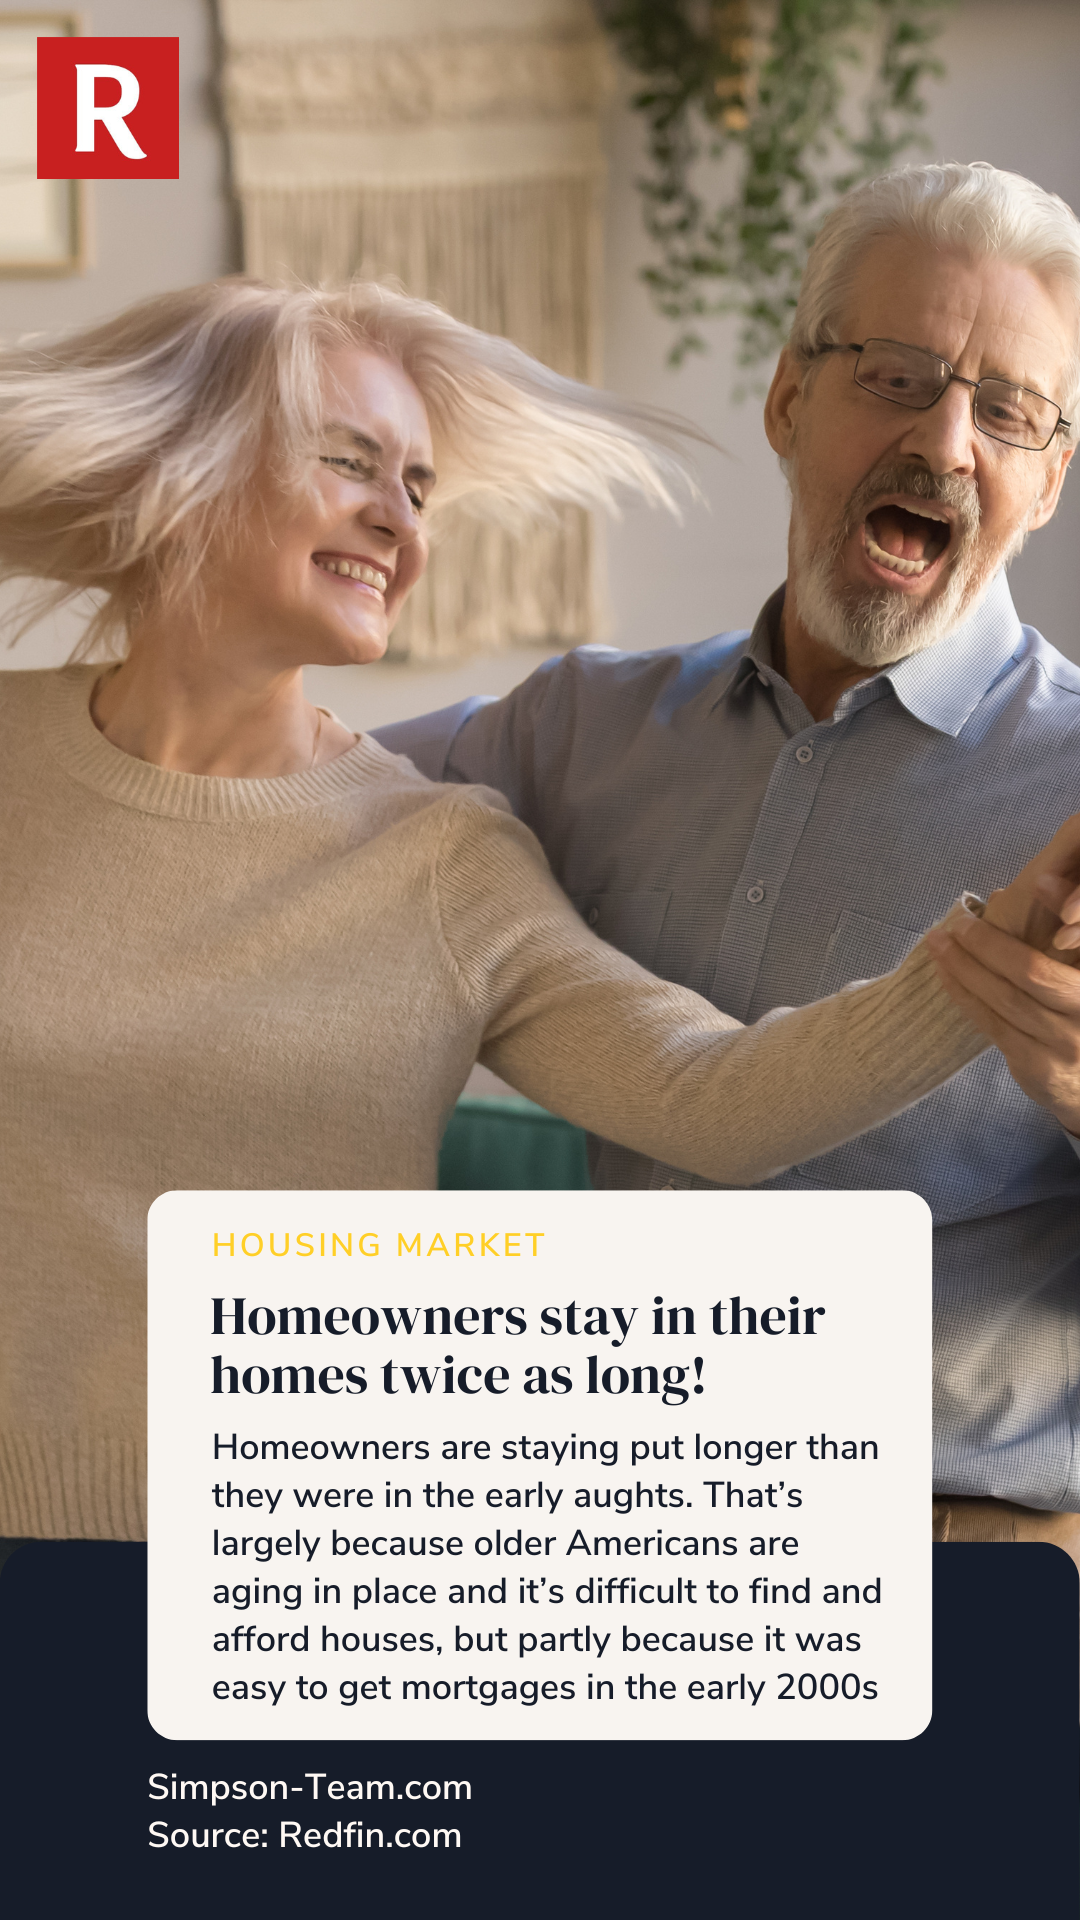 Homeowners stay in their homes twice as long.